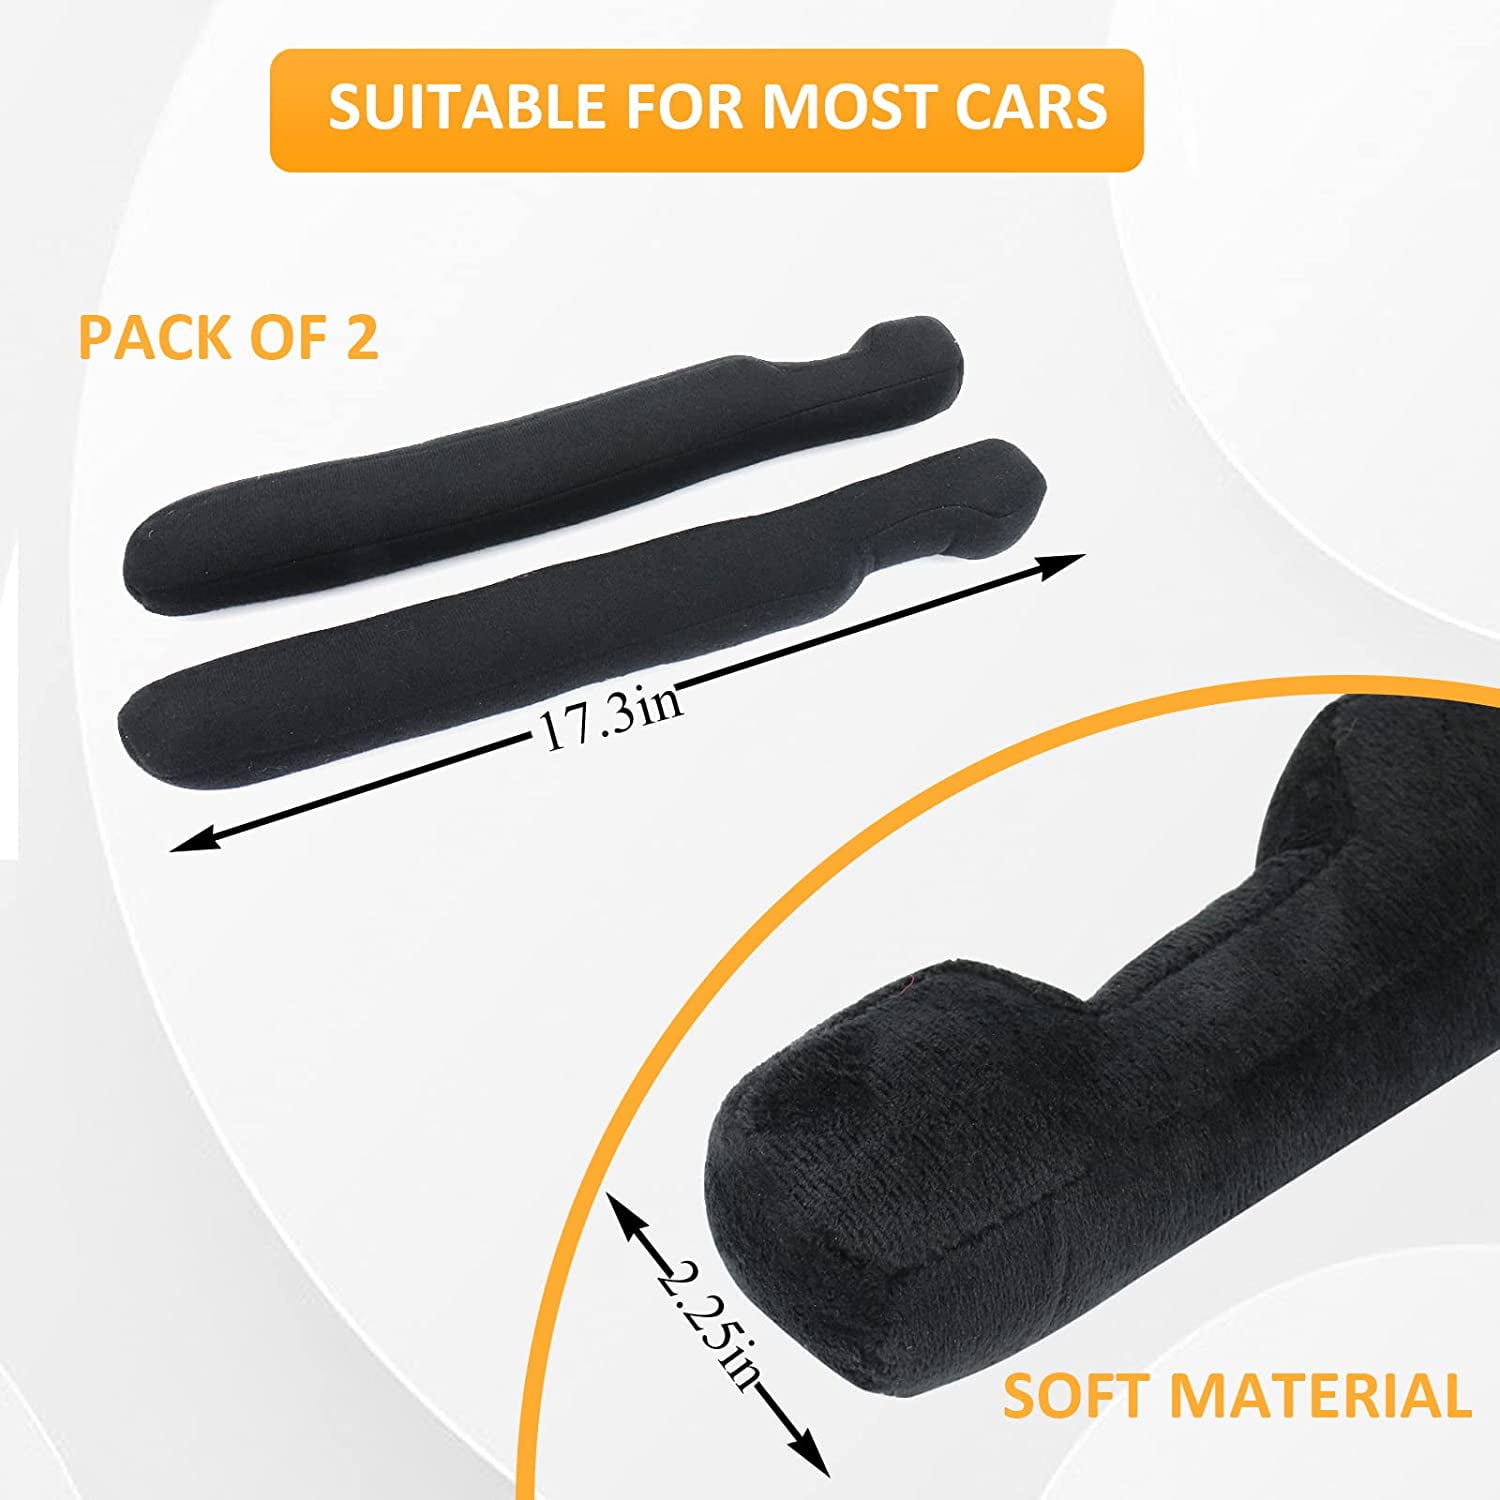 Homaupt Leather Car Seat Gap Filler Universal for Car Truck SUV to Block  The Gap Between Seat and Console Stop Things from Dropping 2 Sets Beige